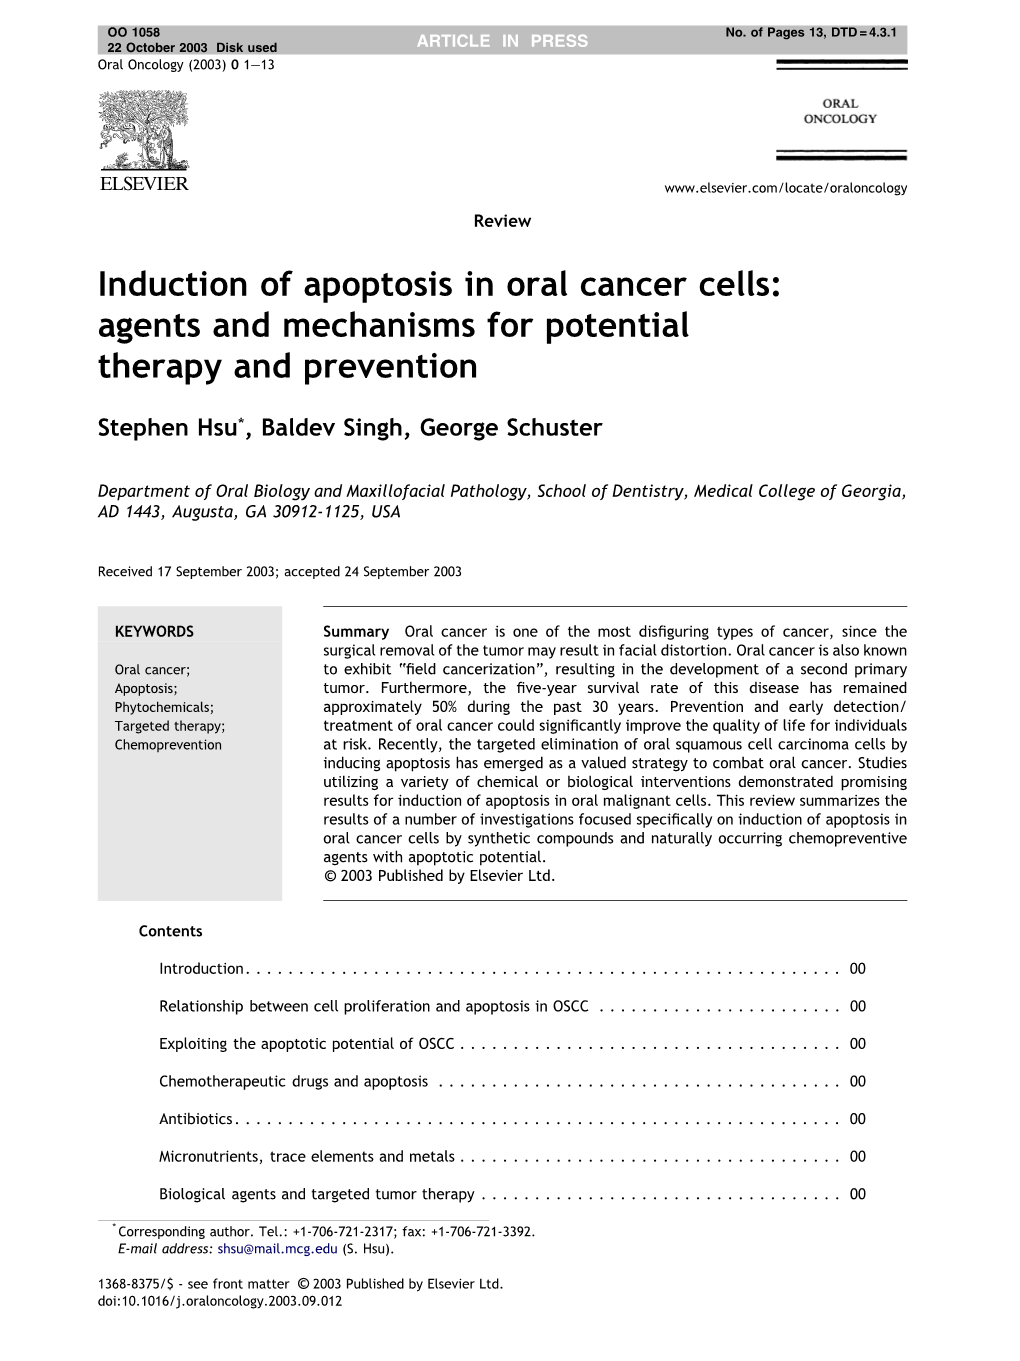 Induction of Apoptosis in Oral Cancer Cells: Agents and Mechanisms for Potential Therapy and Prevention